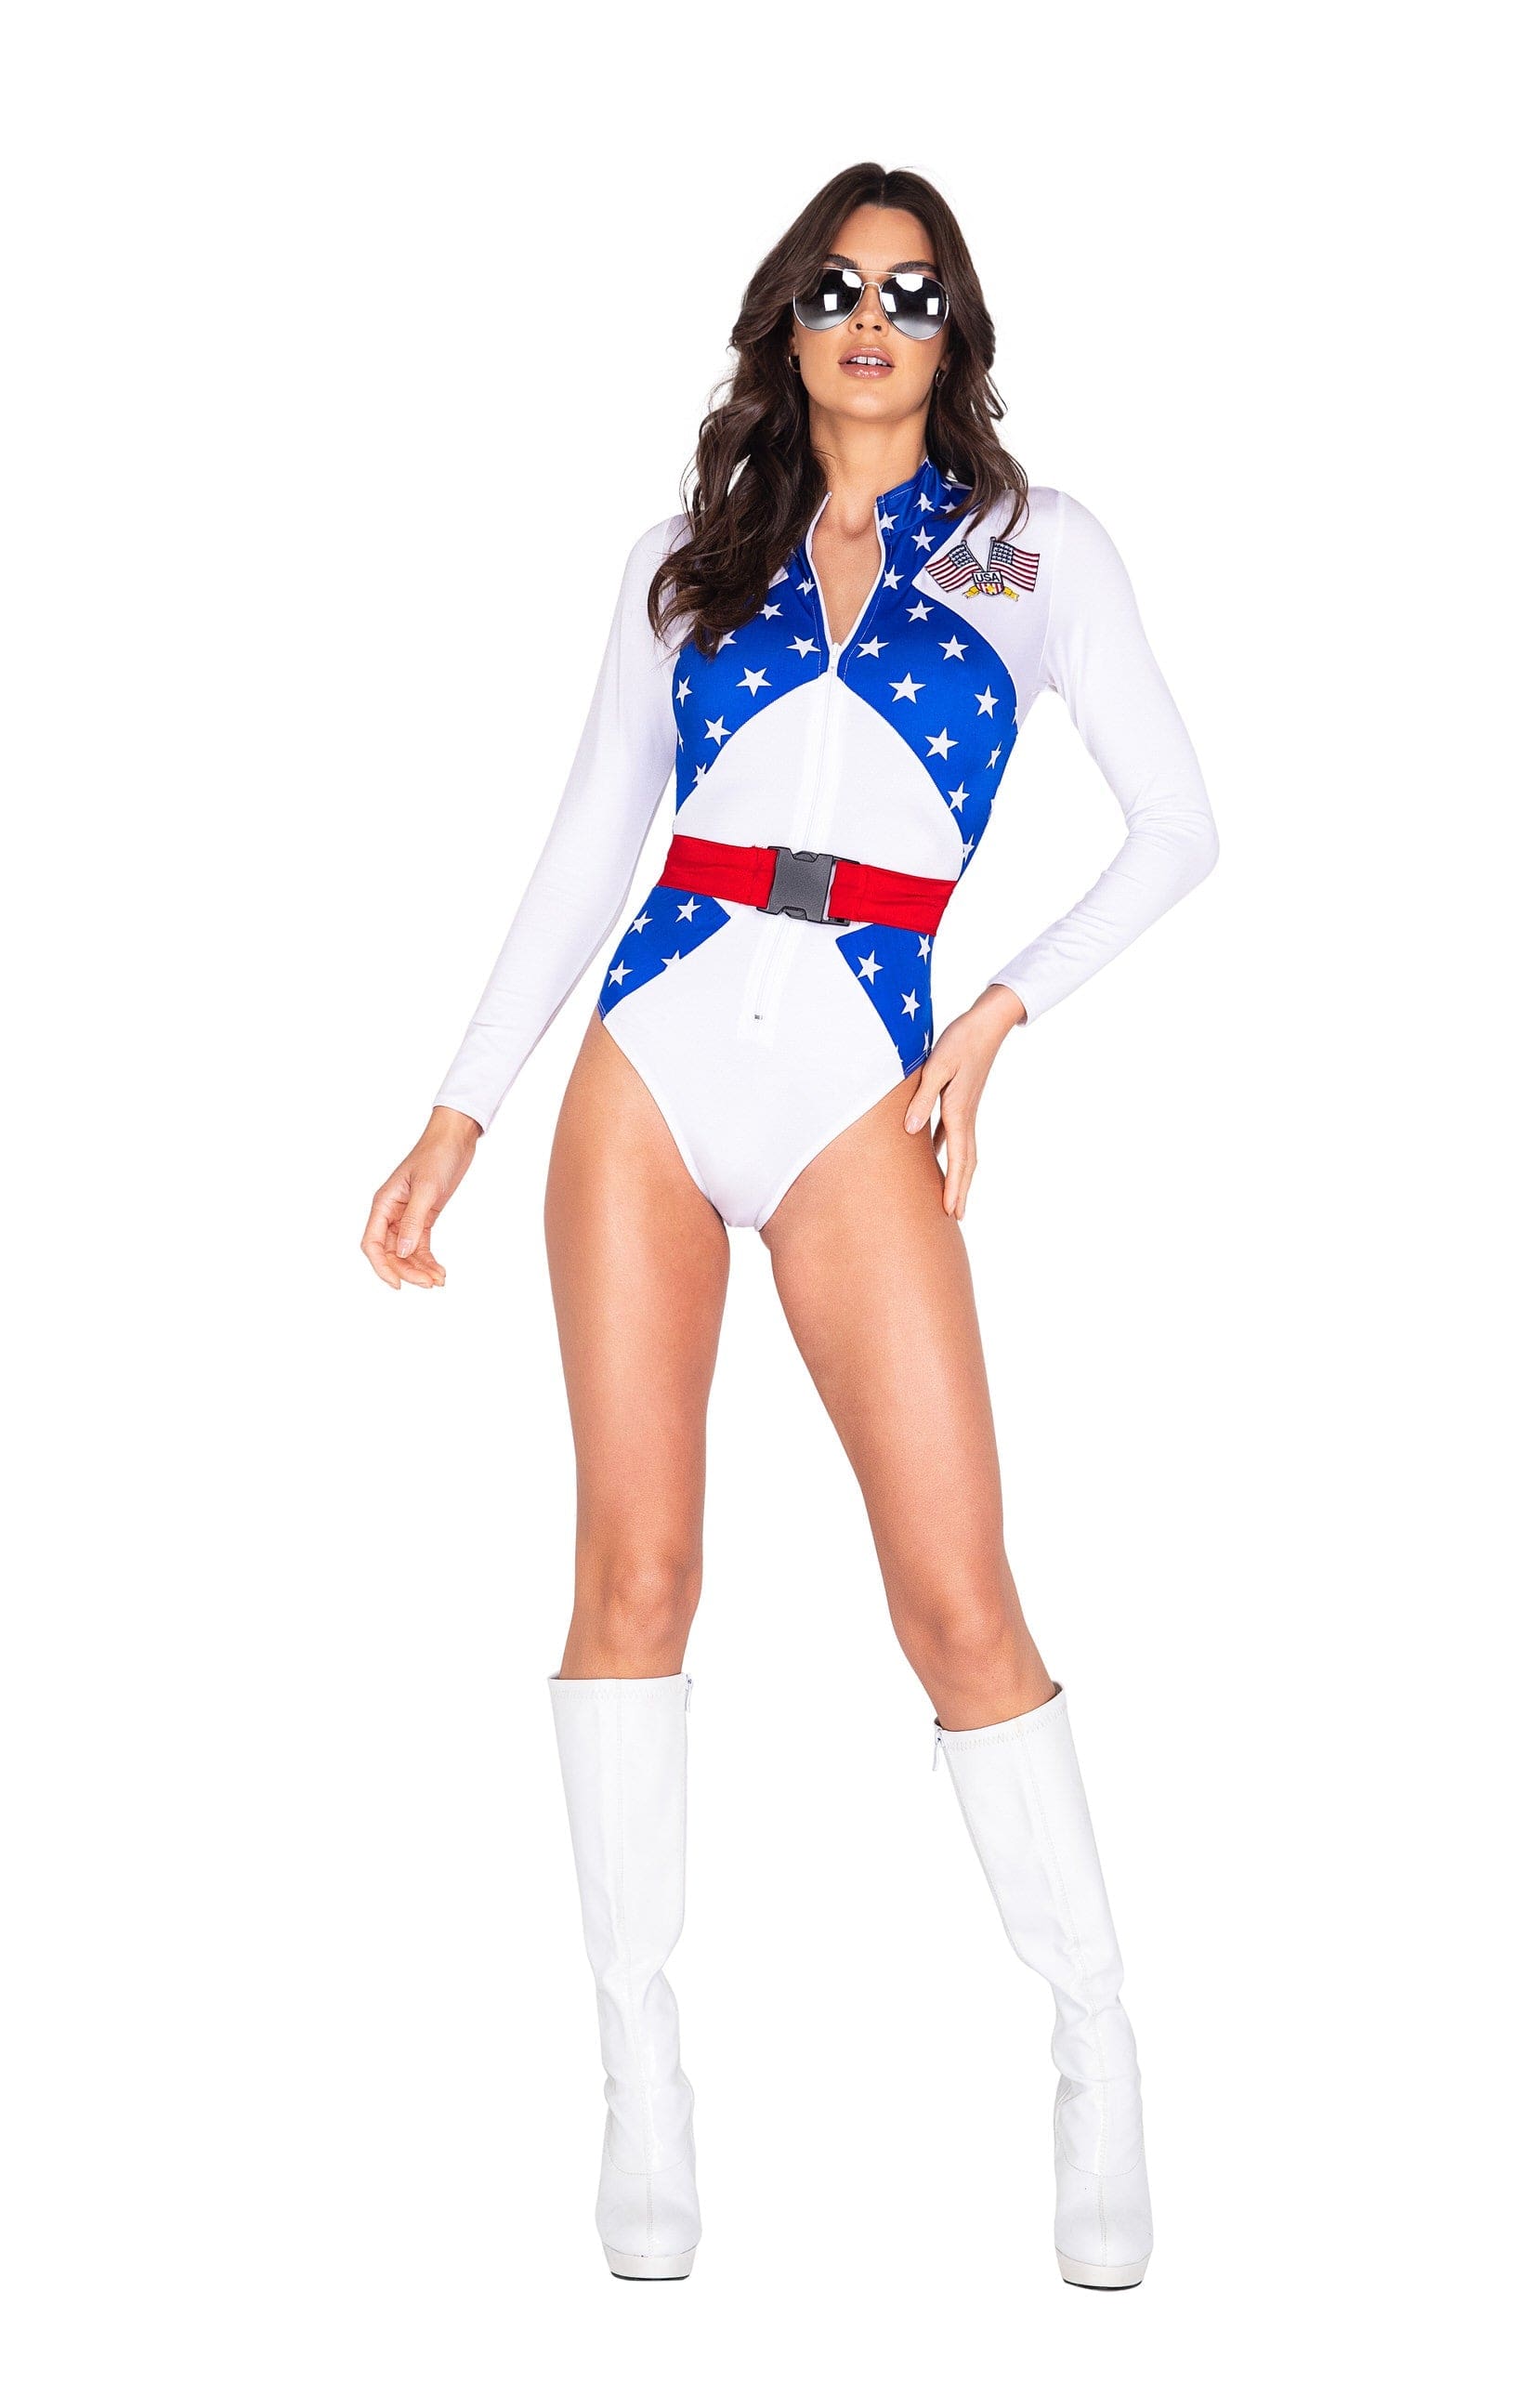 Roma White / Small 2pc Bike Racer Halloween Cosplay Costume 5022-WBR-S 2021 2pc Playboy Racecar Driver Halloween Cosplay Roma Costume PB121 Apparel & Accessories > Costumes & Accessories